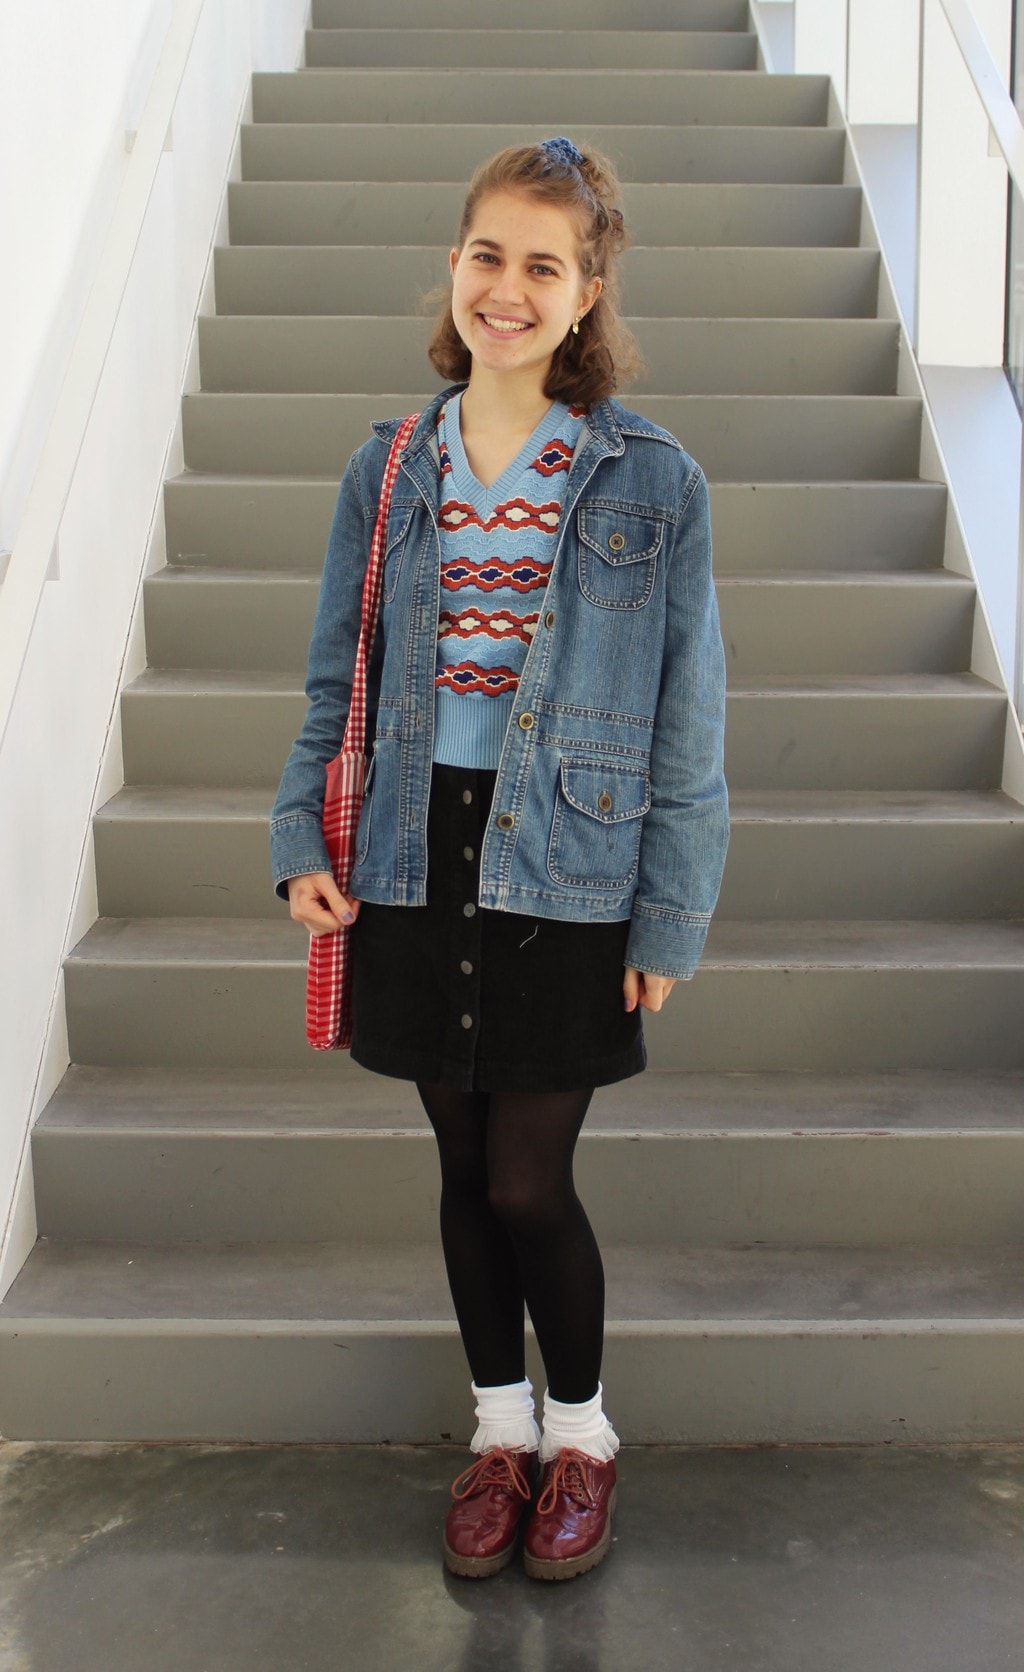 90s outfit: Barnard College at Columbia University student wears an oversized denim jacket with a baby blue and red printed v-neck sweater, a button-up black miniskirt, black opaque tights, and ruffled white socks with chunky maroon lace-up shoes.